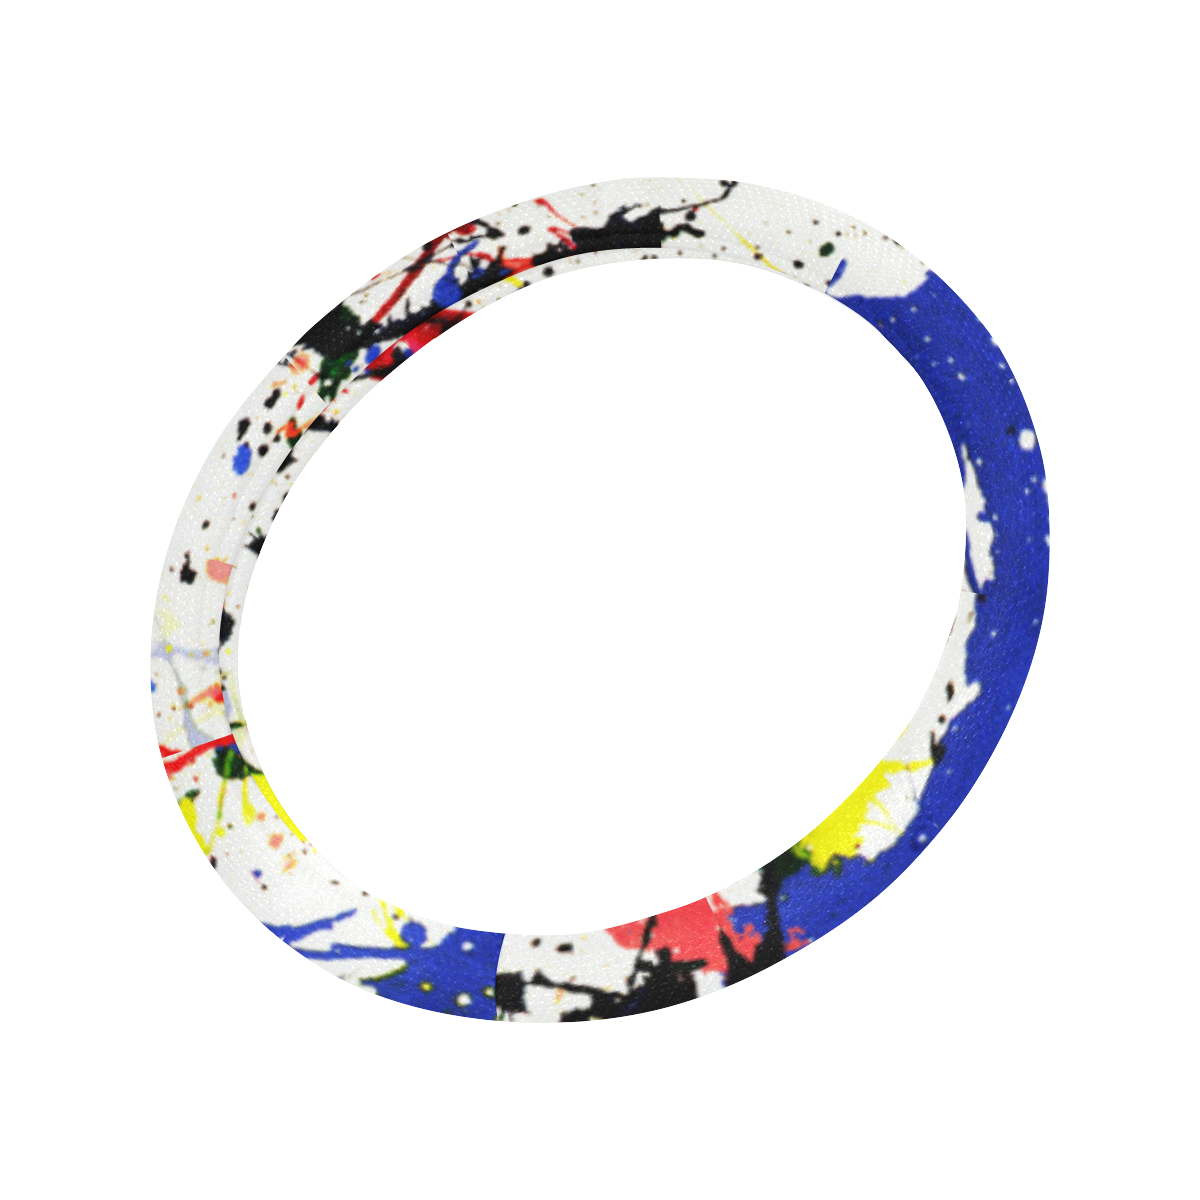 Blue and Red Paint Splatter Steering Wheel Cover with Anti-Slip Insert